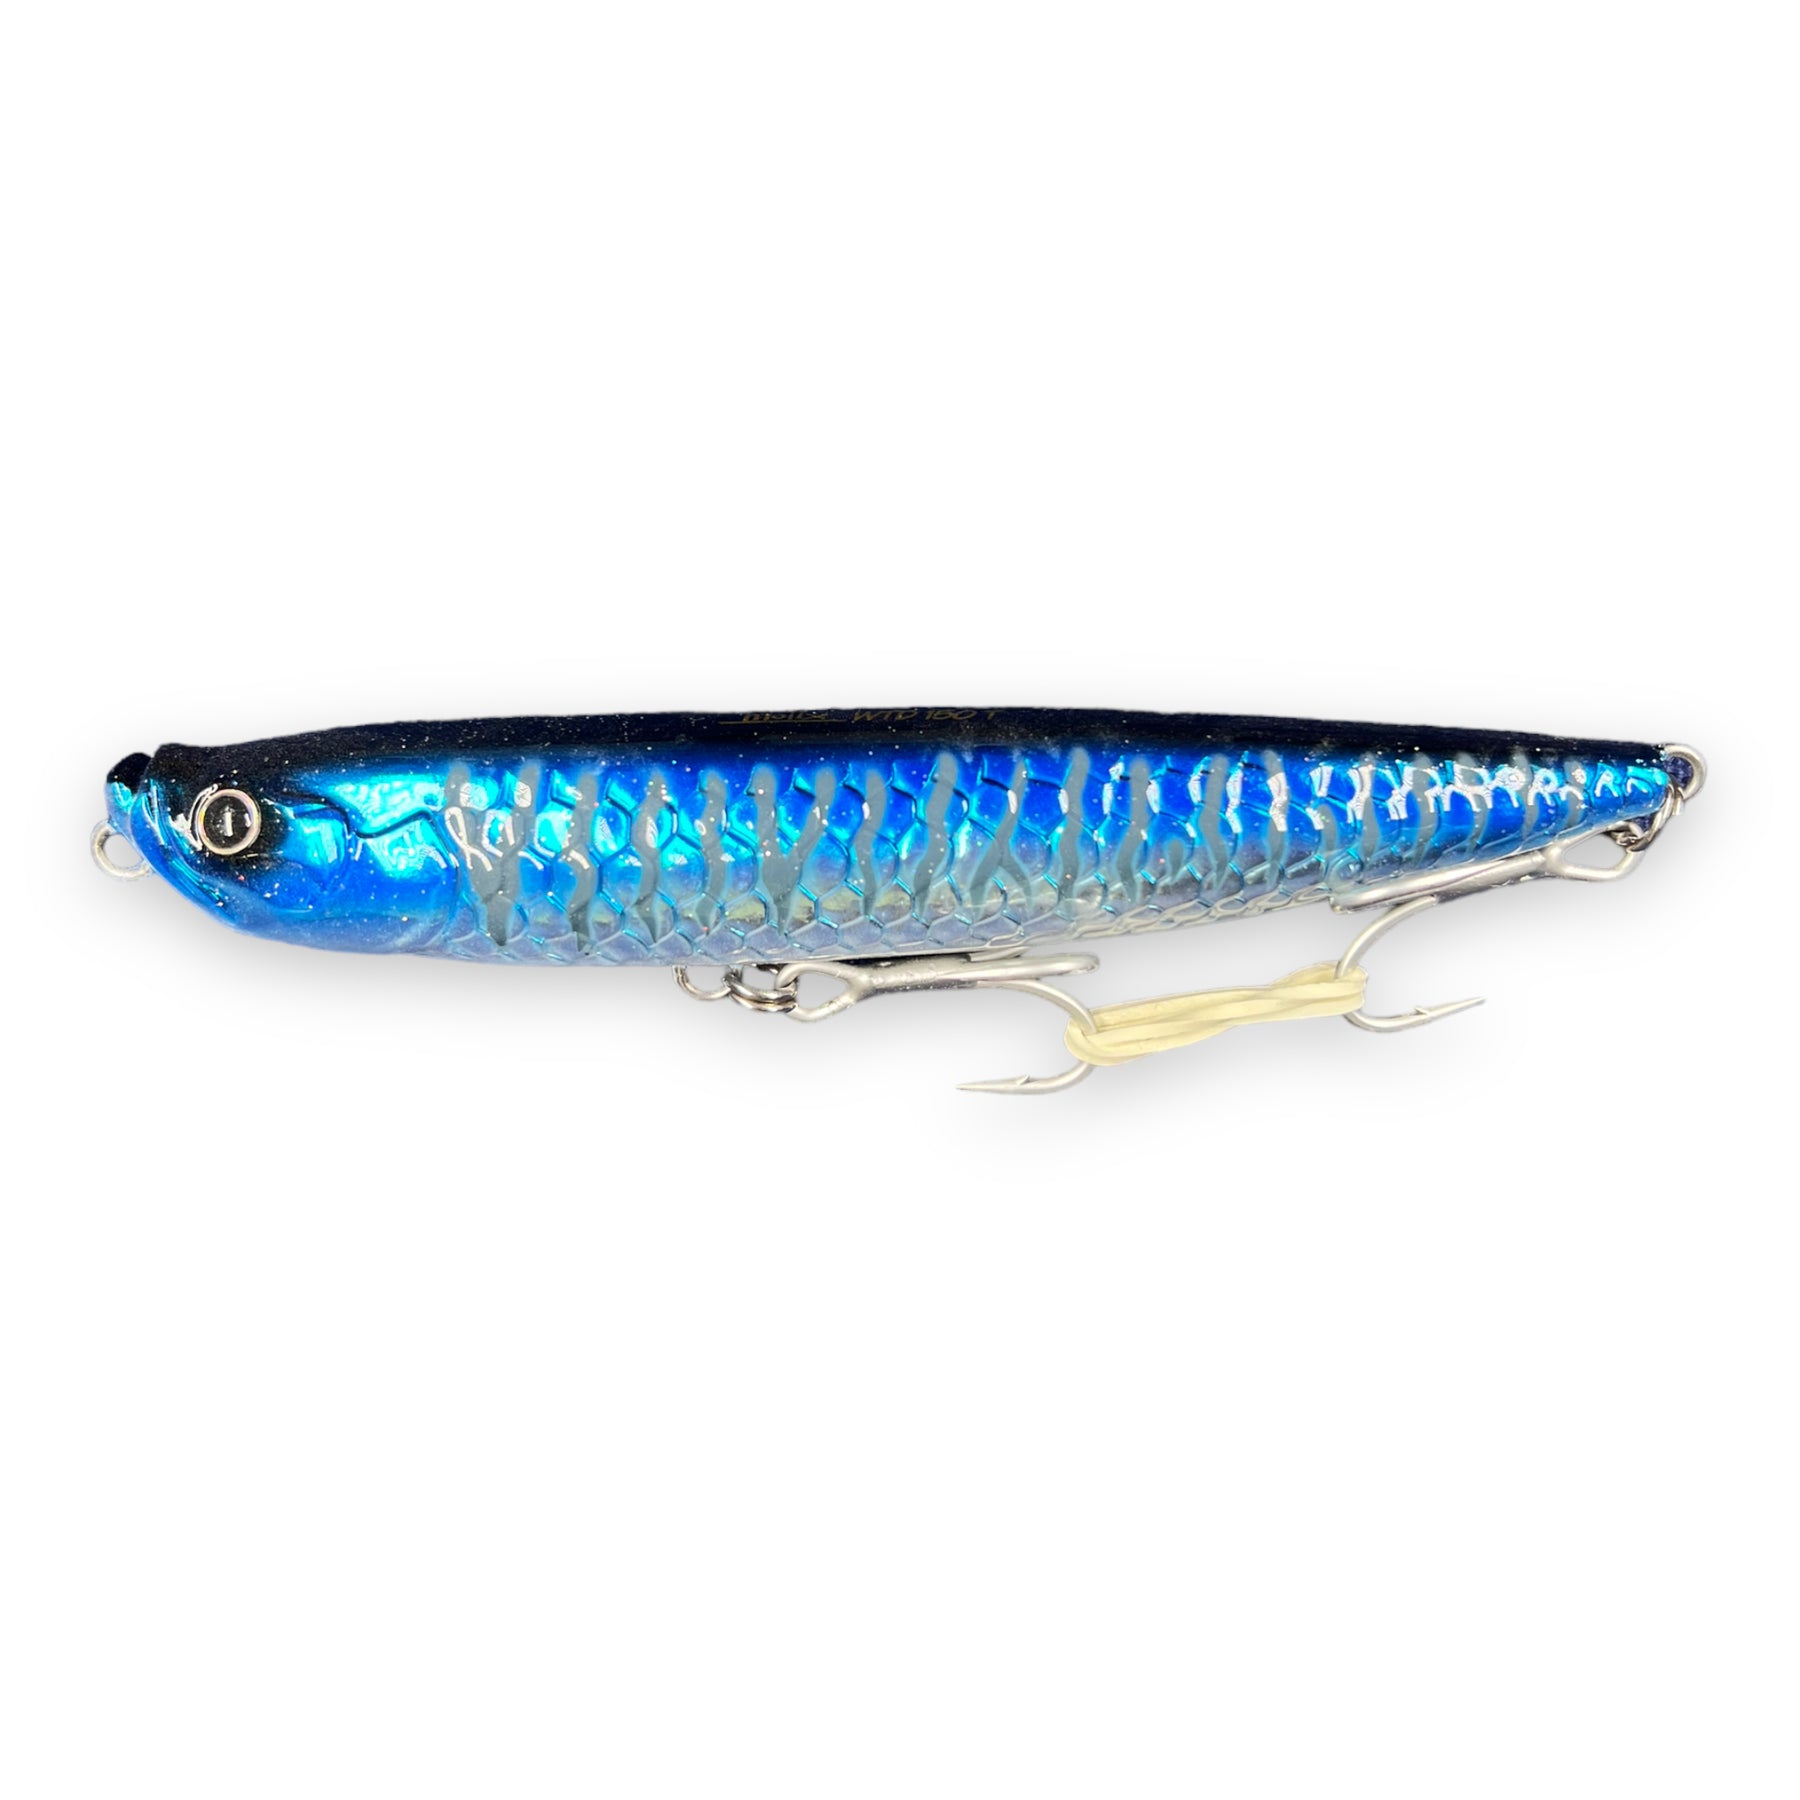 LJ's Compleat Angler Gladstone - Molix shad 140 and 185 in store